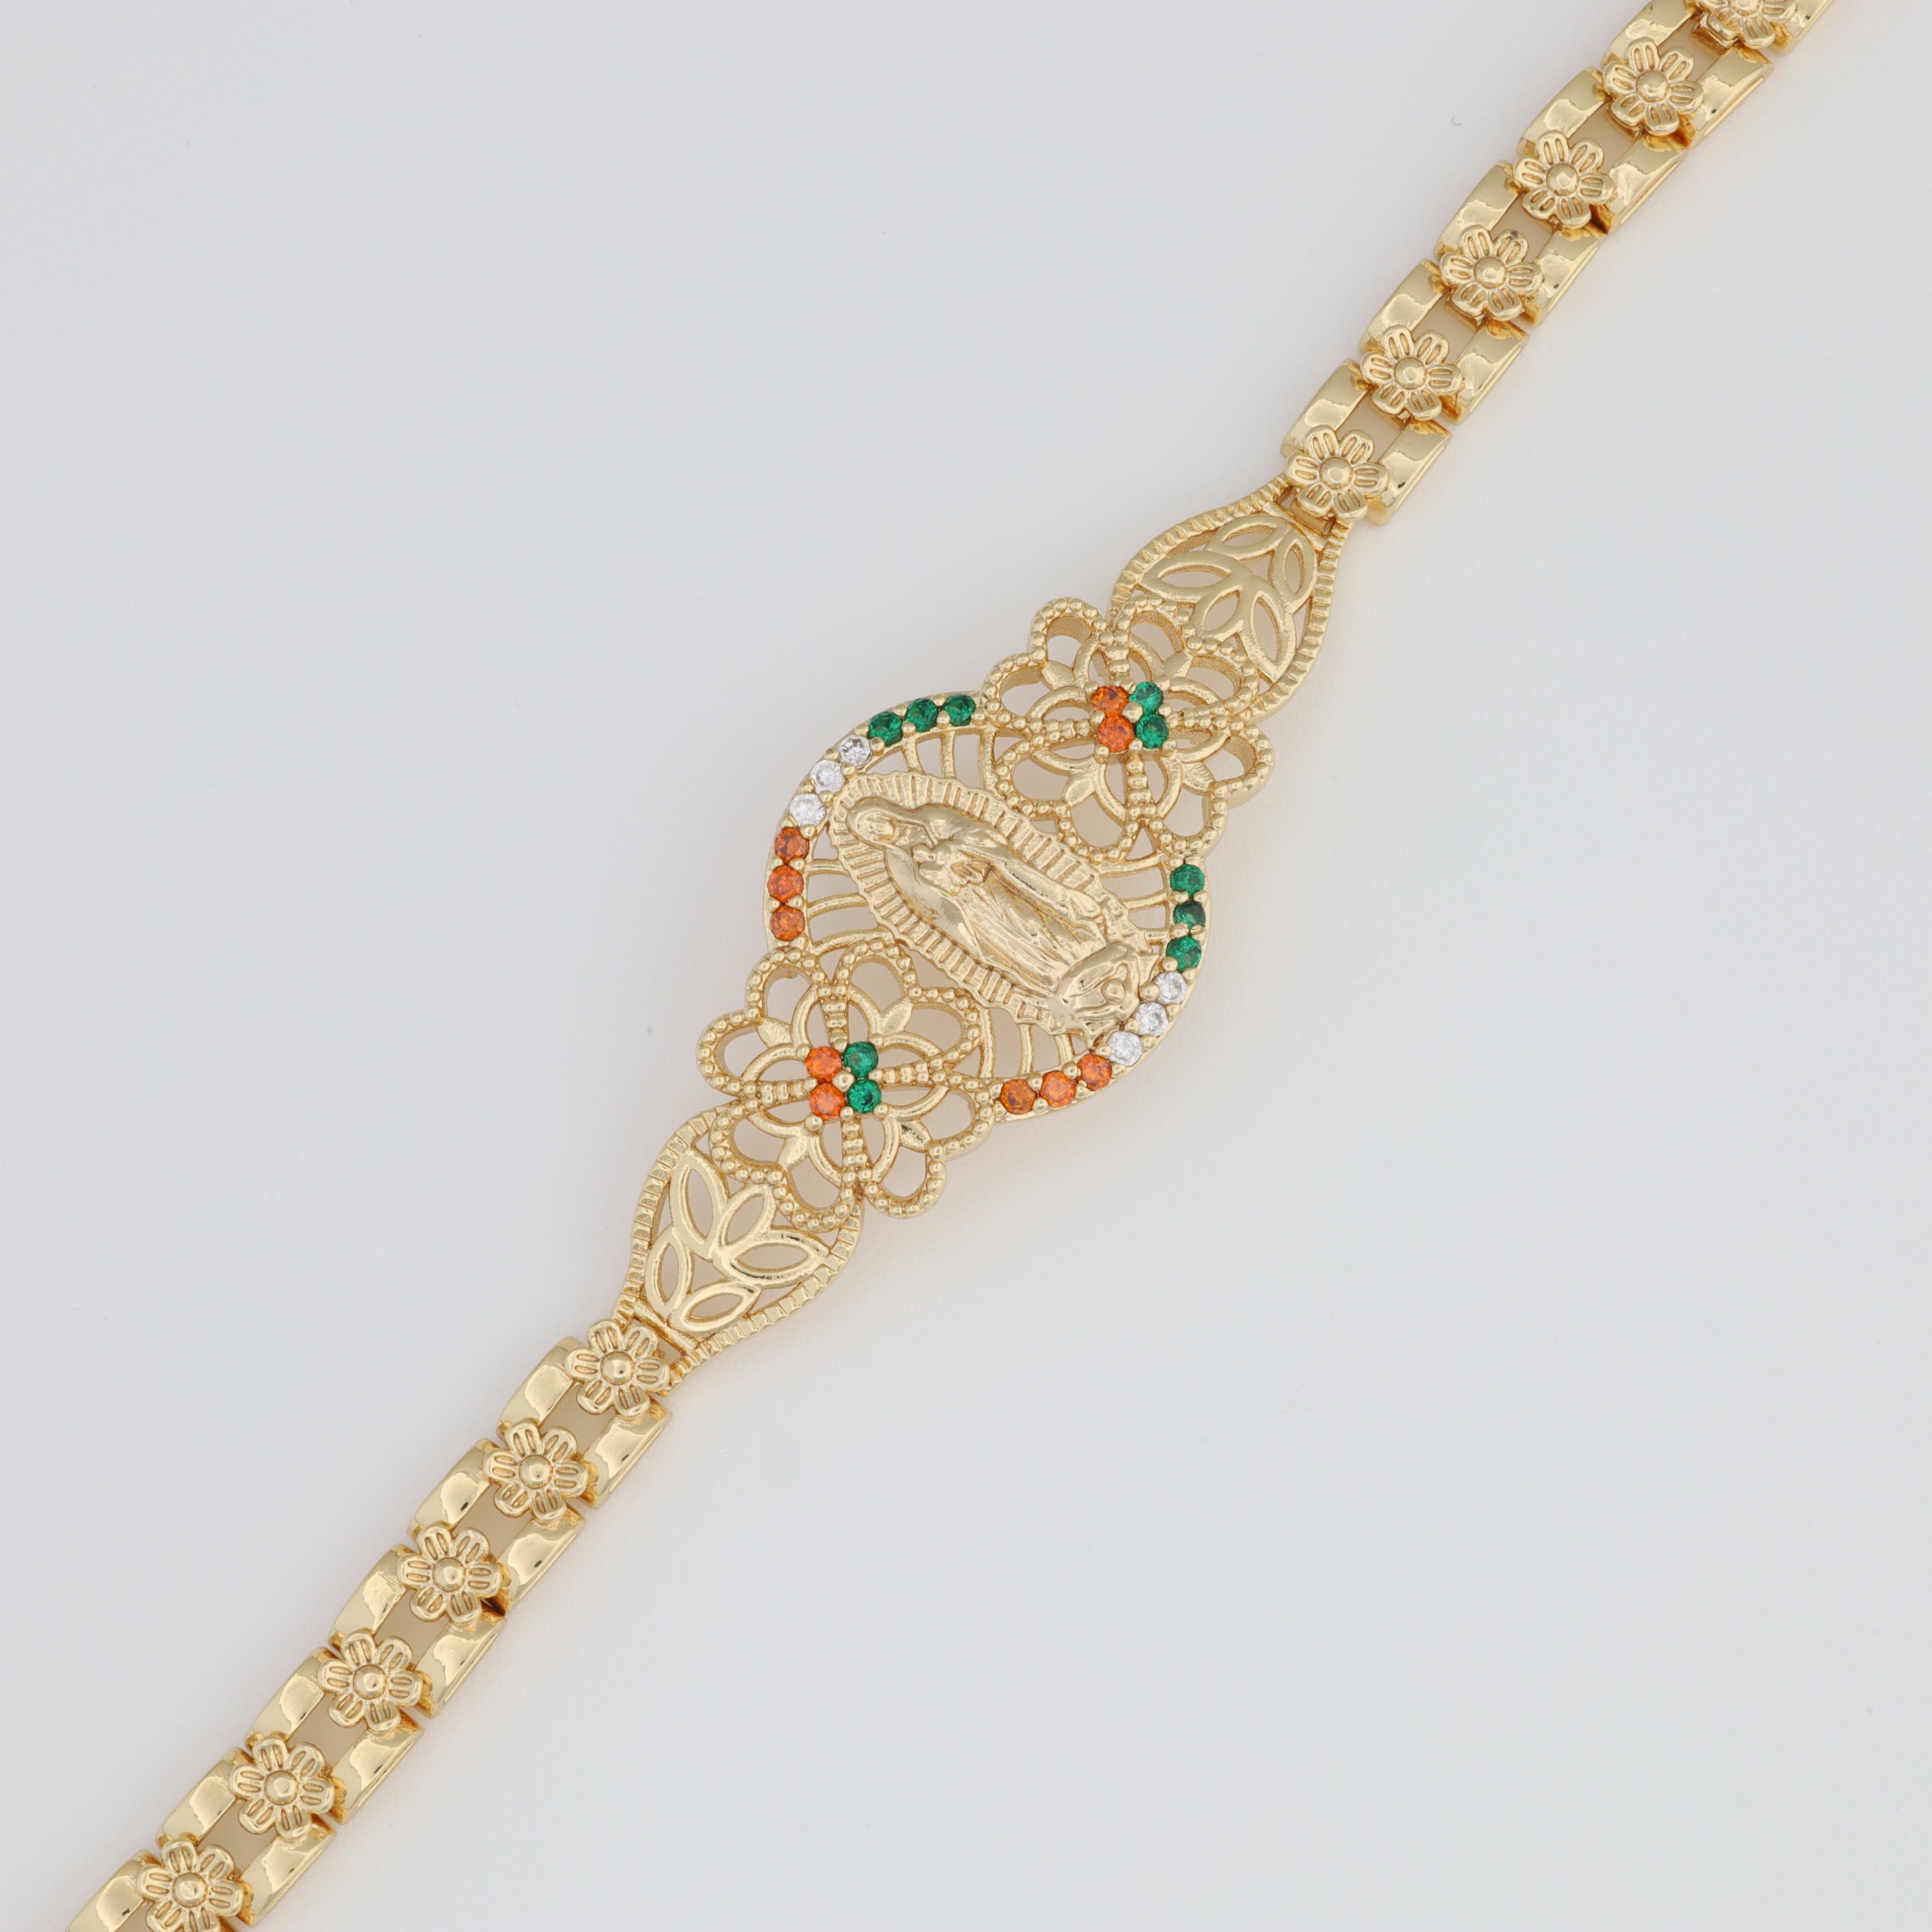 Saint Guadalupe Bracelet and tennis clasp